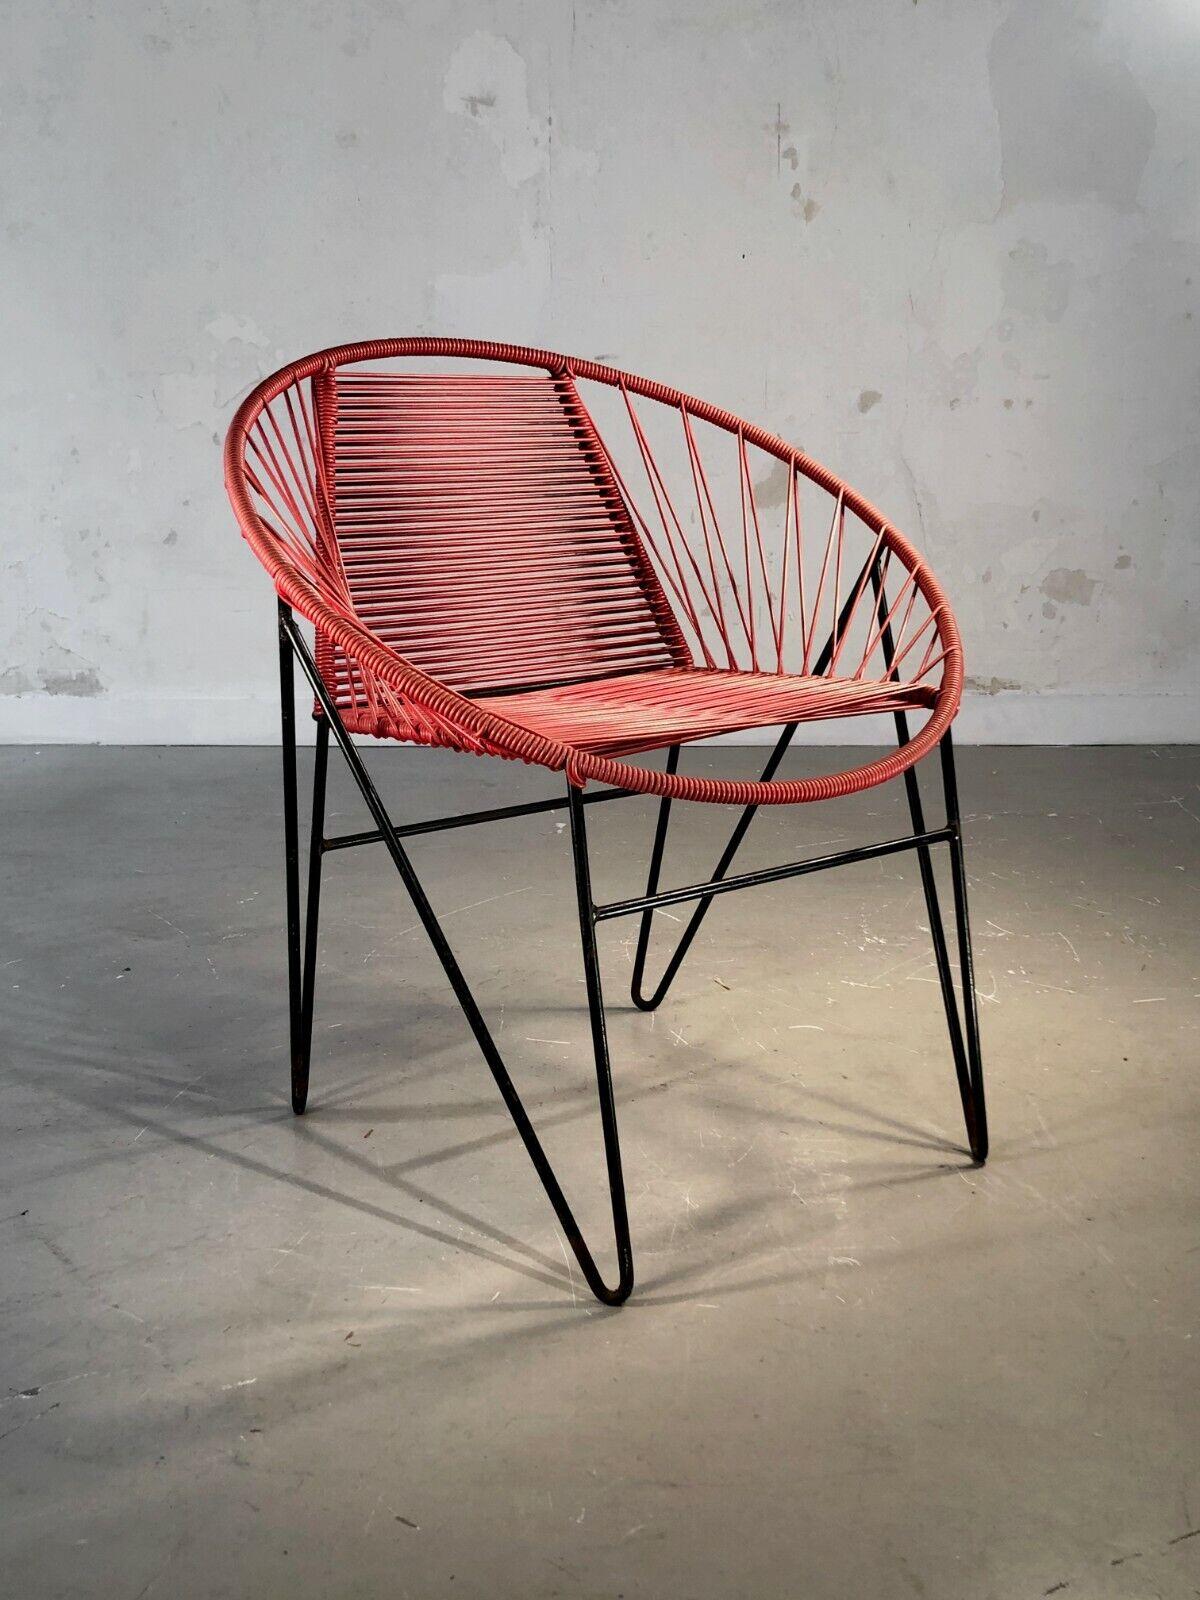 Mid-20th Century A MID-CENTURY-MODERN MODERNIST CHAIR Attributed to RAOUL GUYS, France 1950 For Sale